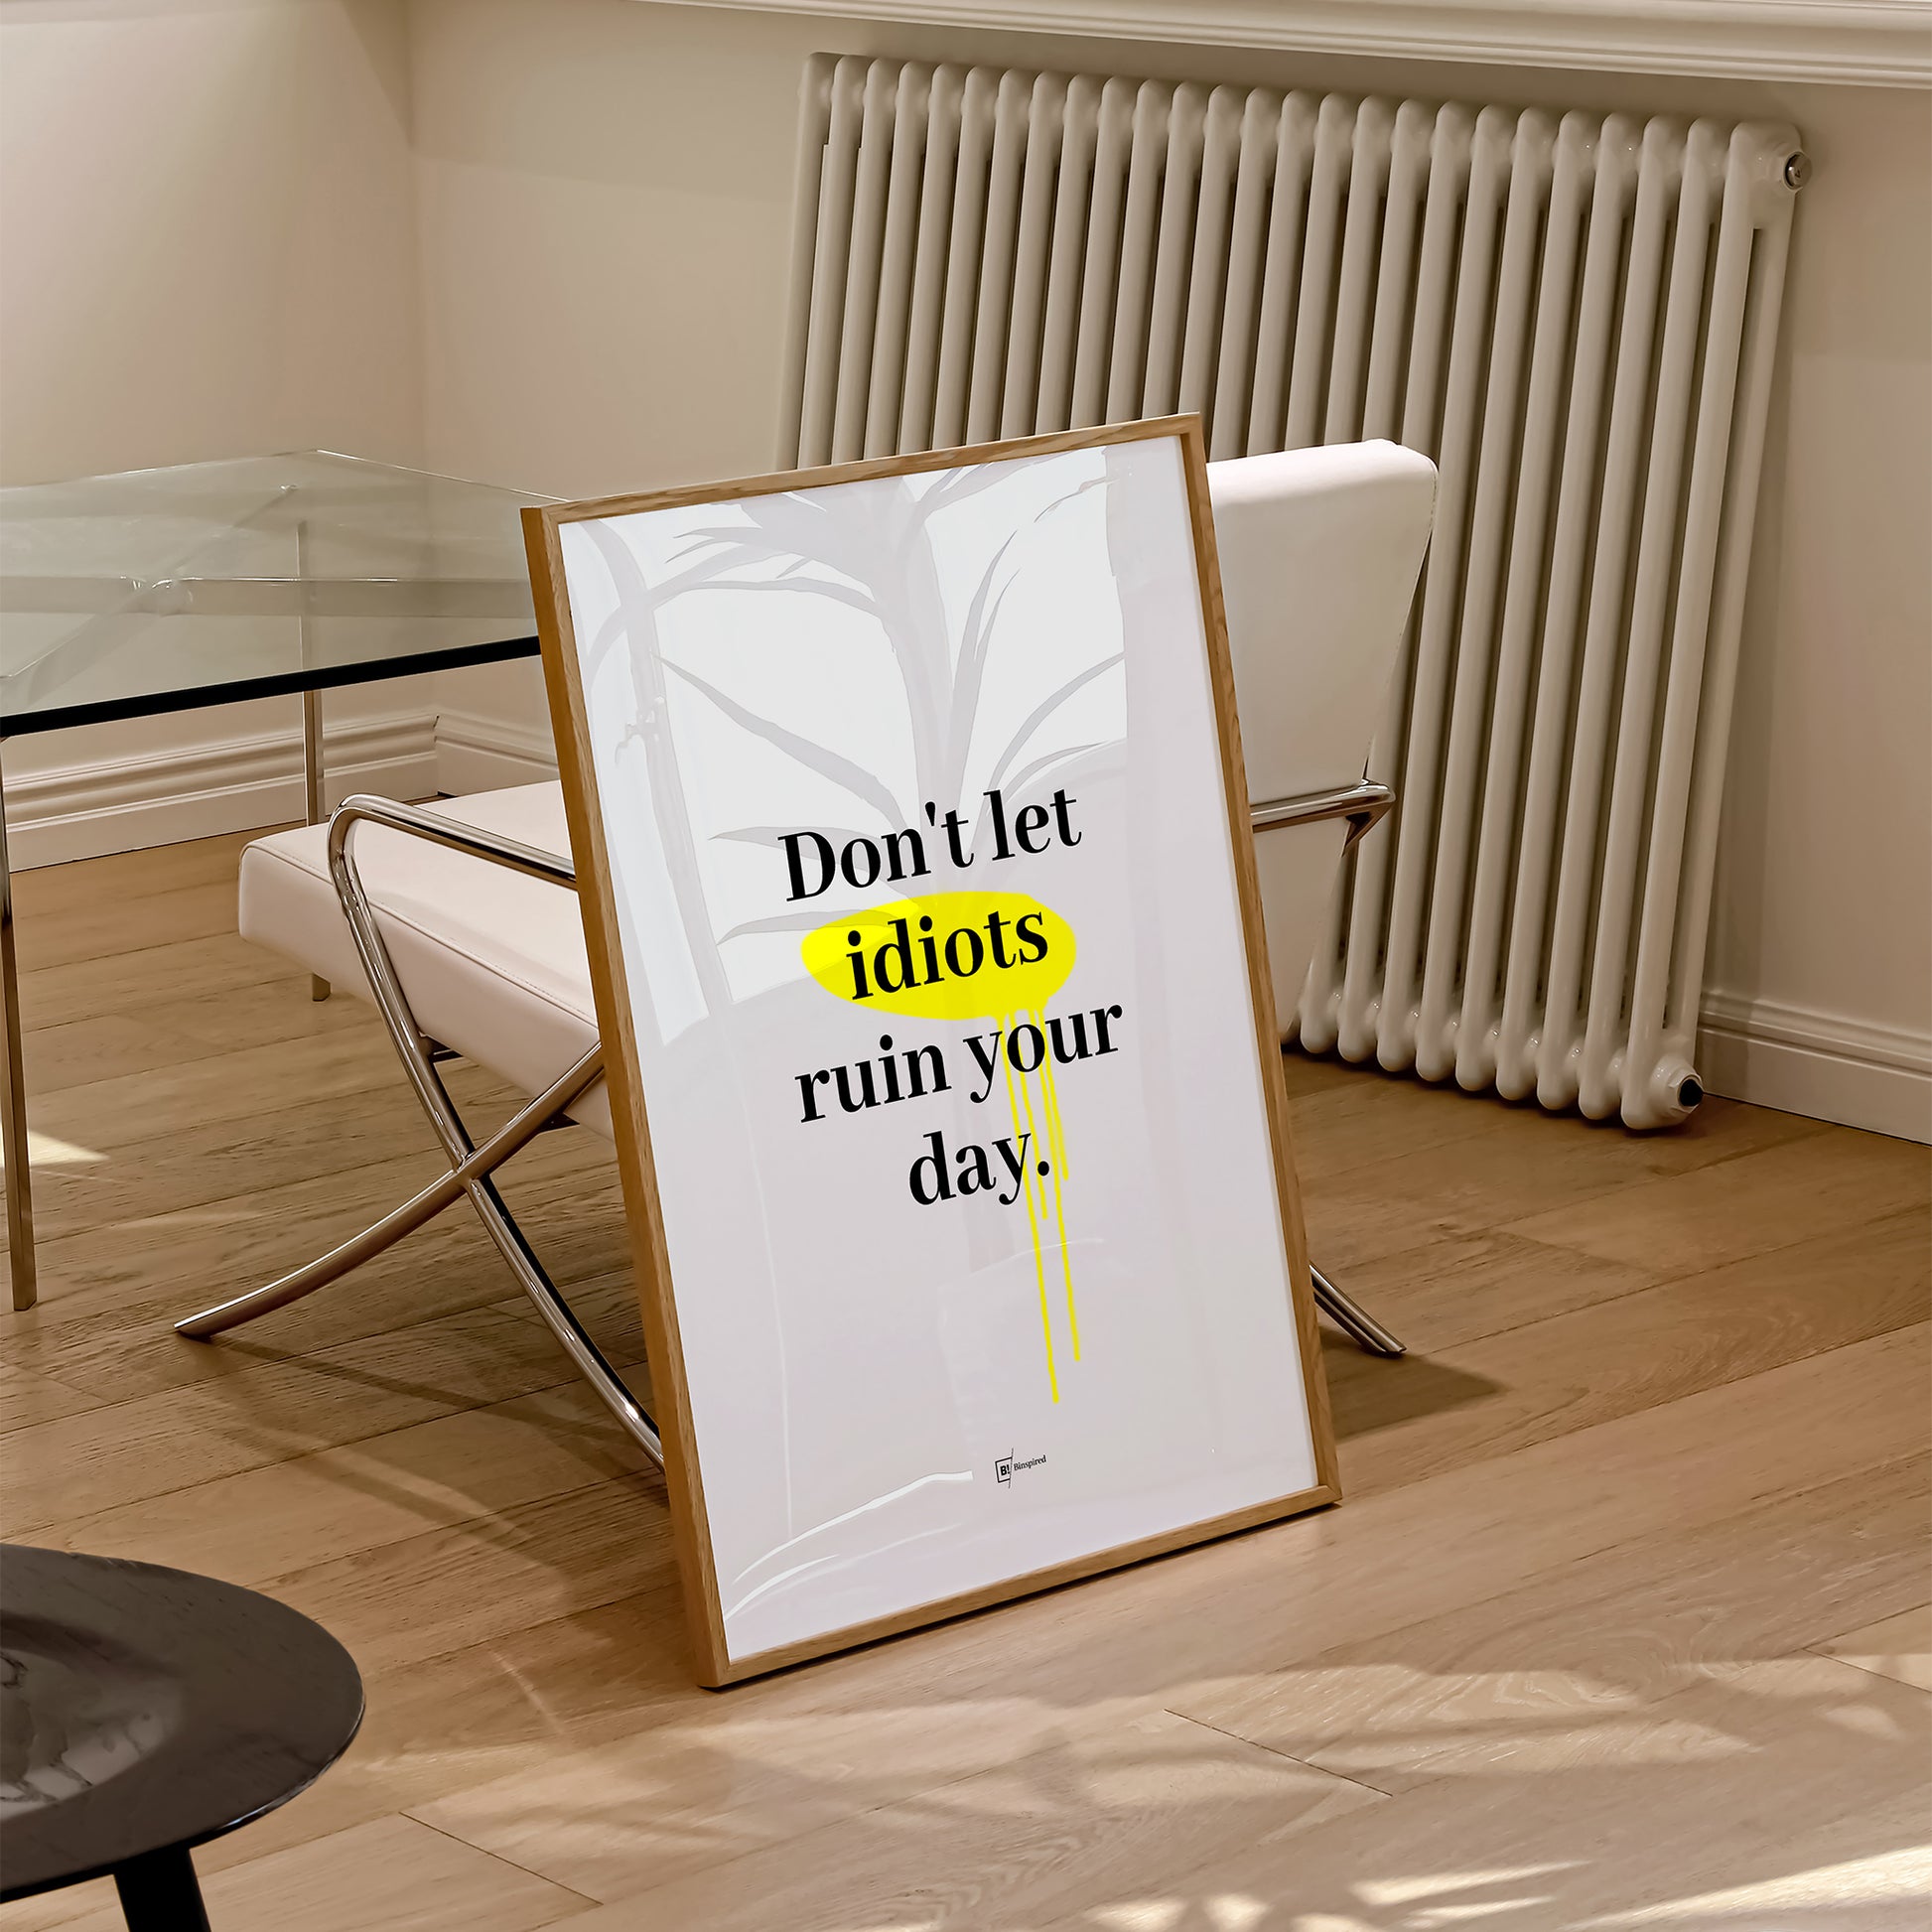 Be inspired by our "Don't let idiots ruin your day" quote art print! This artwork was printed using the giclée process on archival acid-free paper and is presented in a natural oak frame that captures its timeless beauty in every detail.